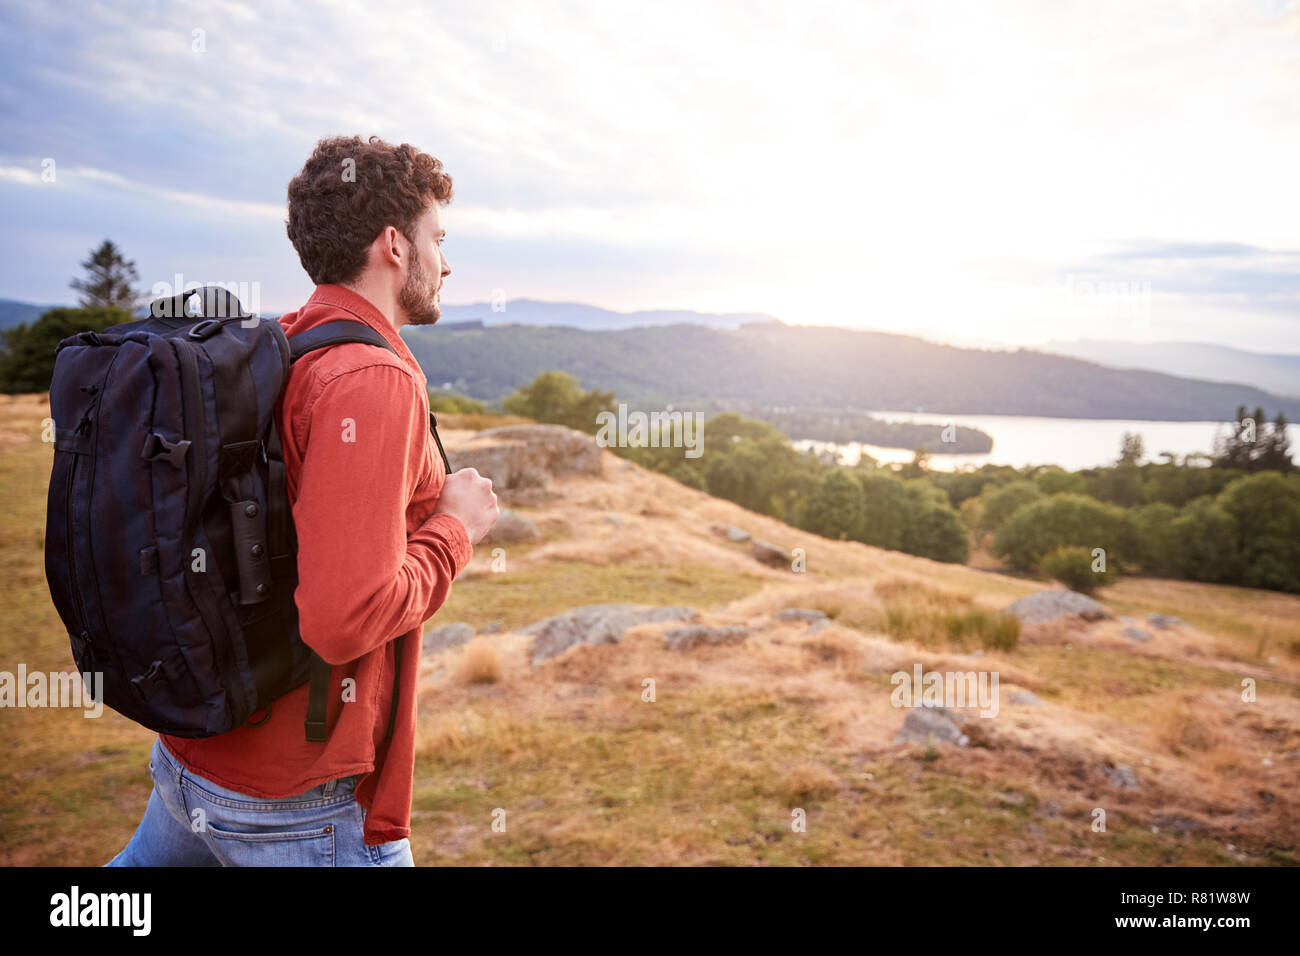 A young adult Caucasian man walking alone on a hill, admiring the view, side view Stock Photo